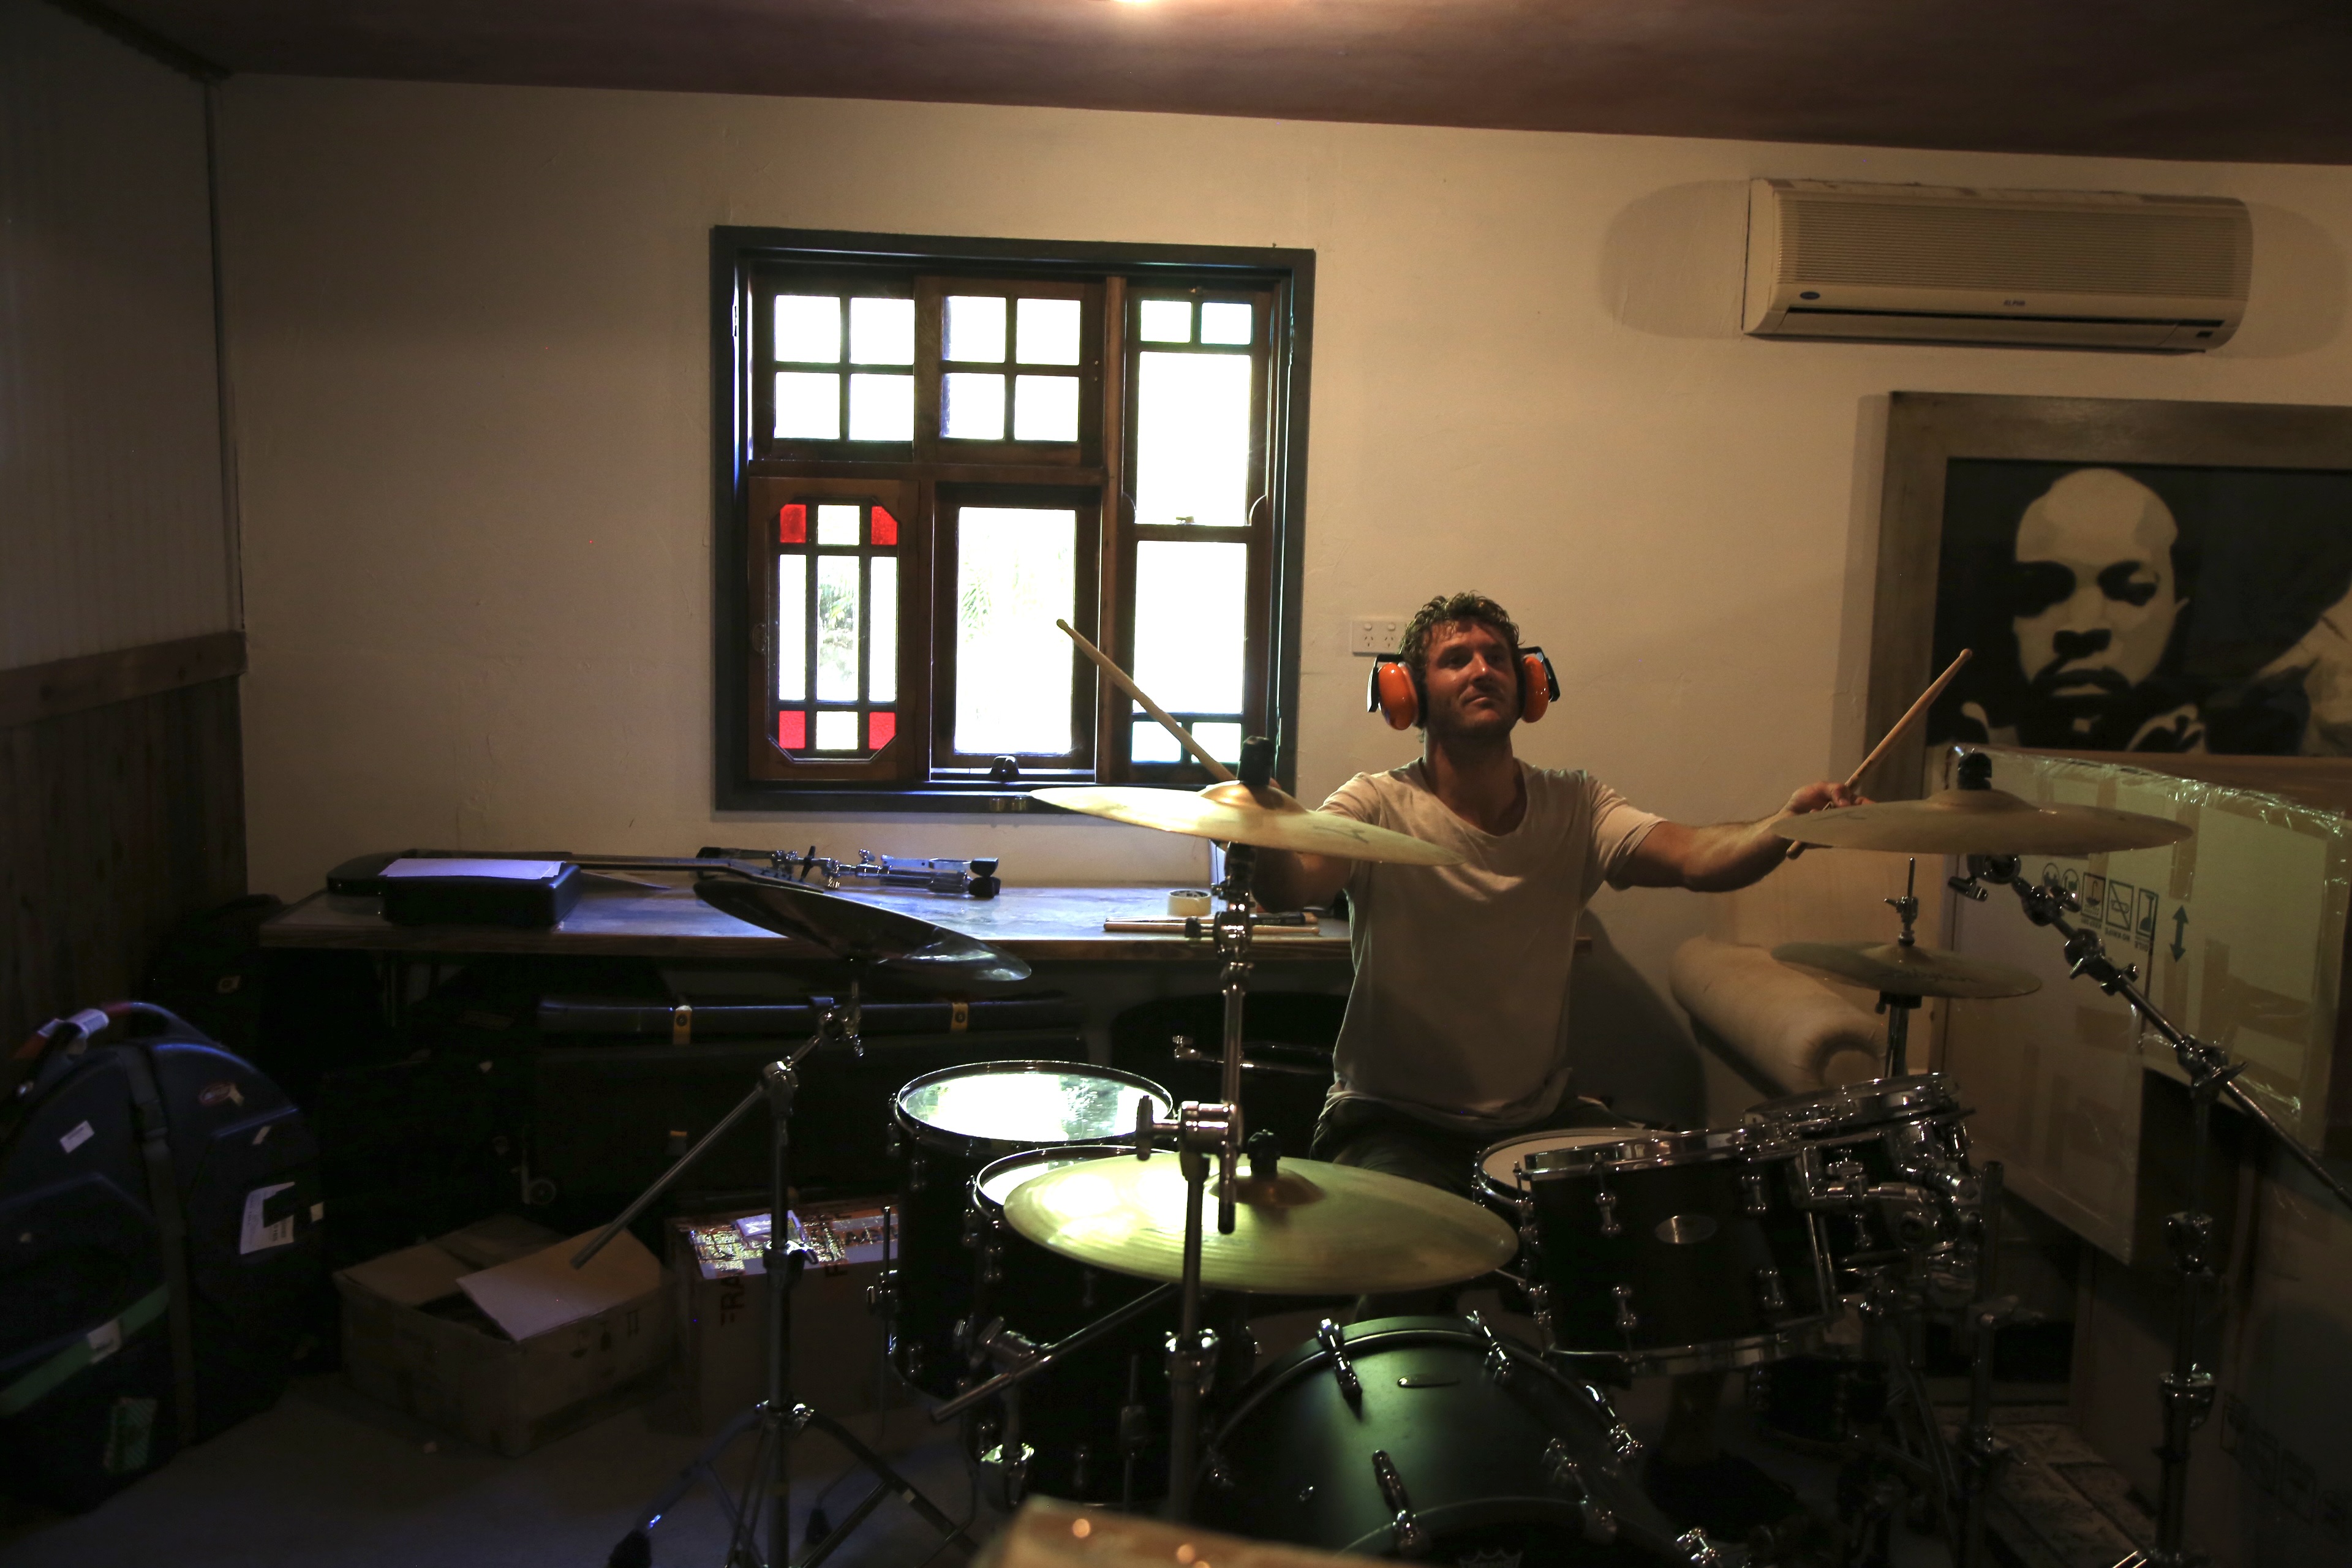 A man wears headphones while playing drums in a basement. A stainglass window is in background